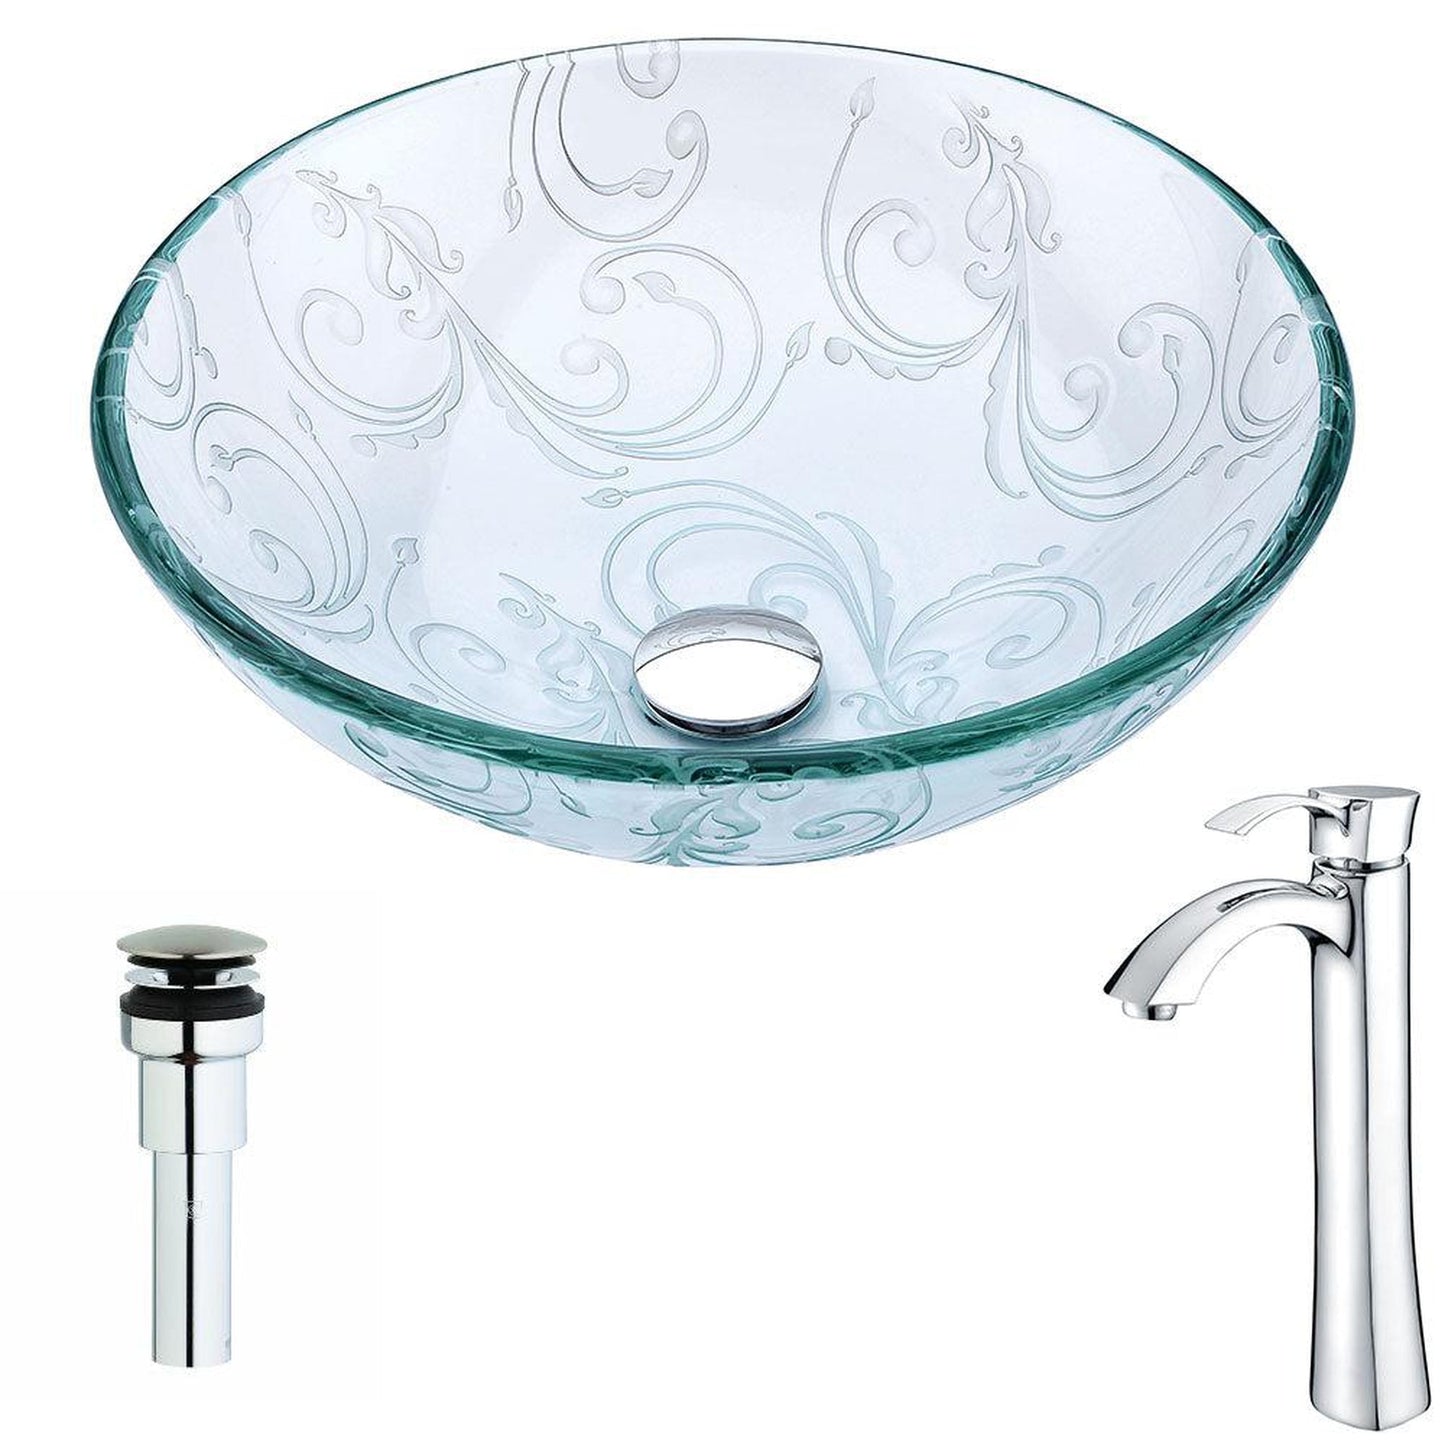 ANZZI Vieno Series 17" x 17" Round Crystal Clear Floral Deco-Glass Vessel Sink With Chrome Pop-Up Drain and Harmony Faucet